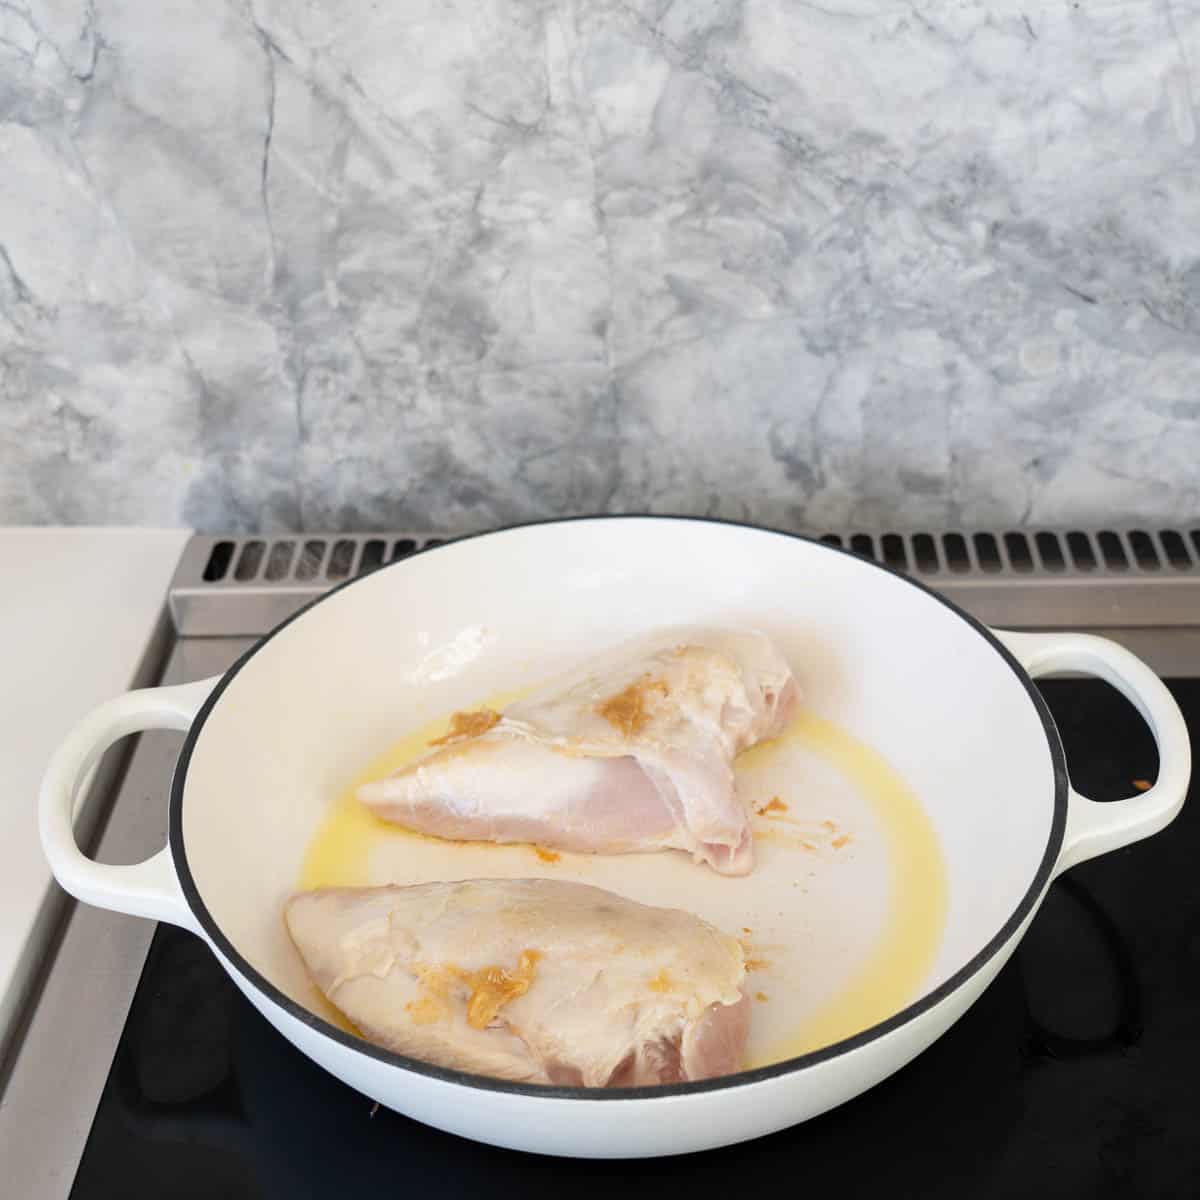 Two chicken breasts with golden cooked skin in a large white casserole dish. 